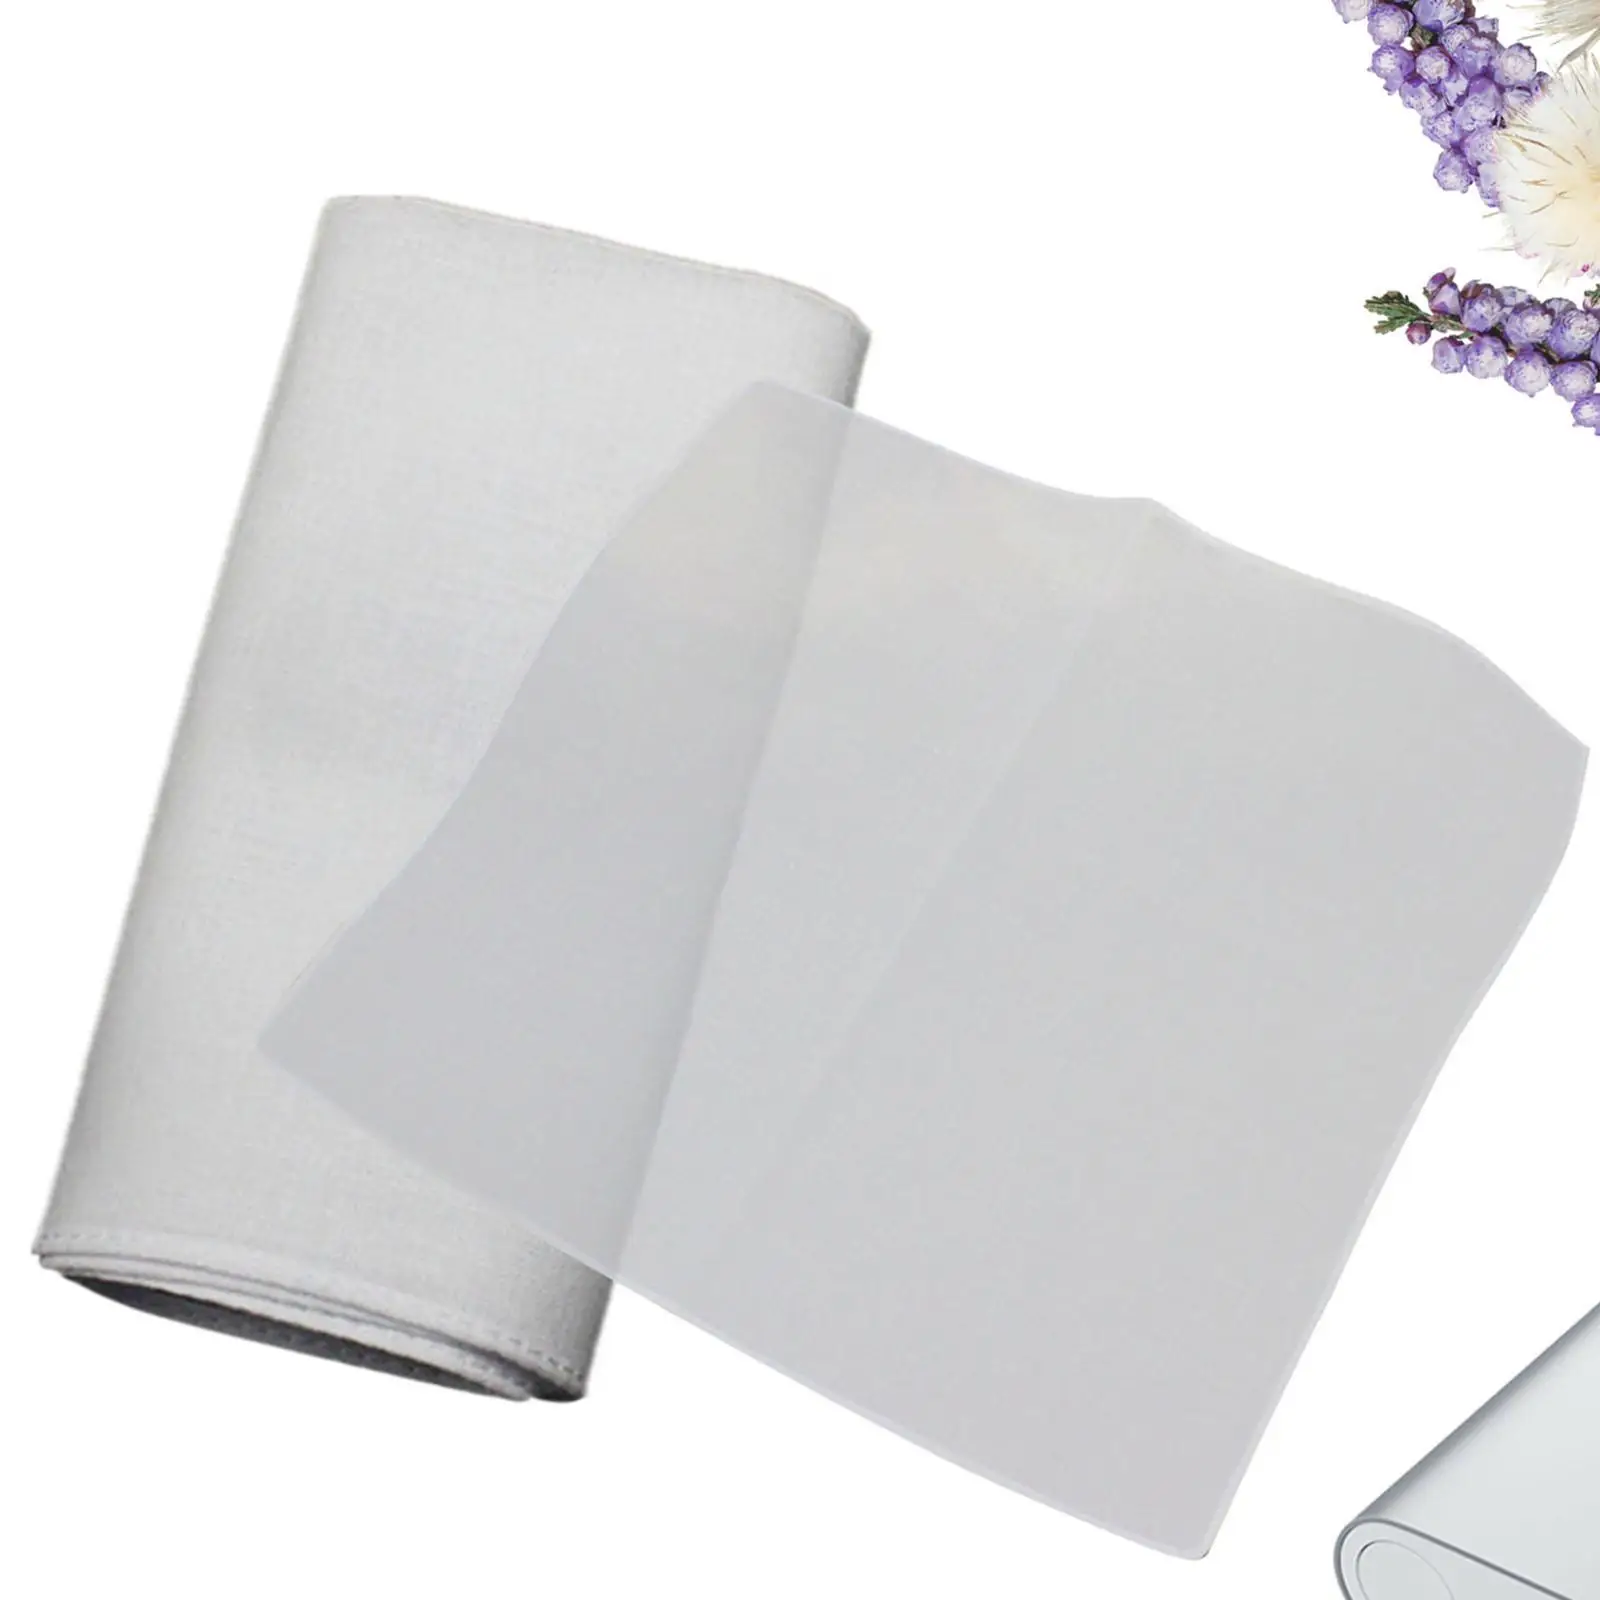 10x Solid White Handkerchiefs Pocket Squares for Men Women Soft 42S White Hankies Men`s Handkerchiefs for Dyeing DIY Crafts